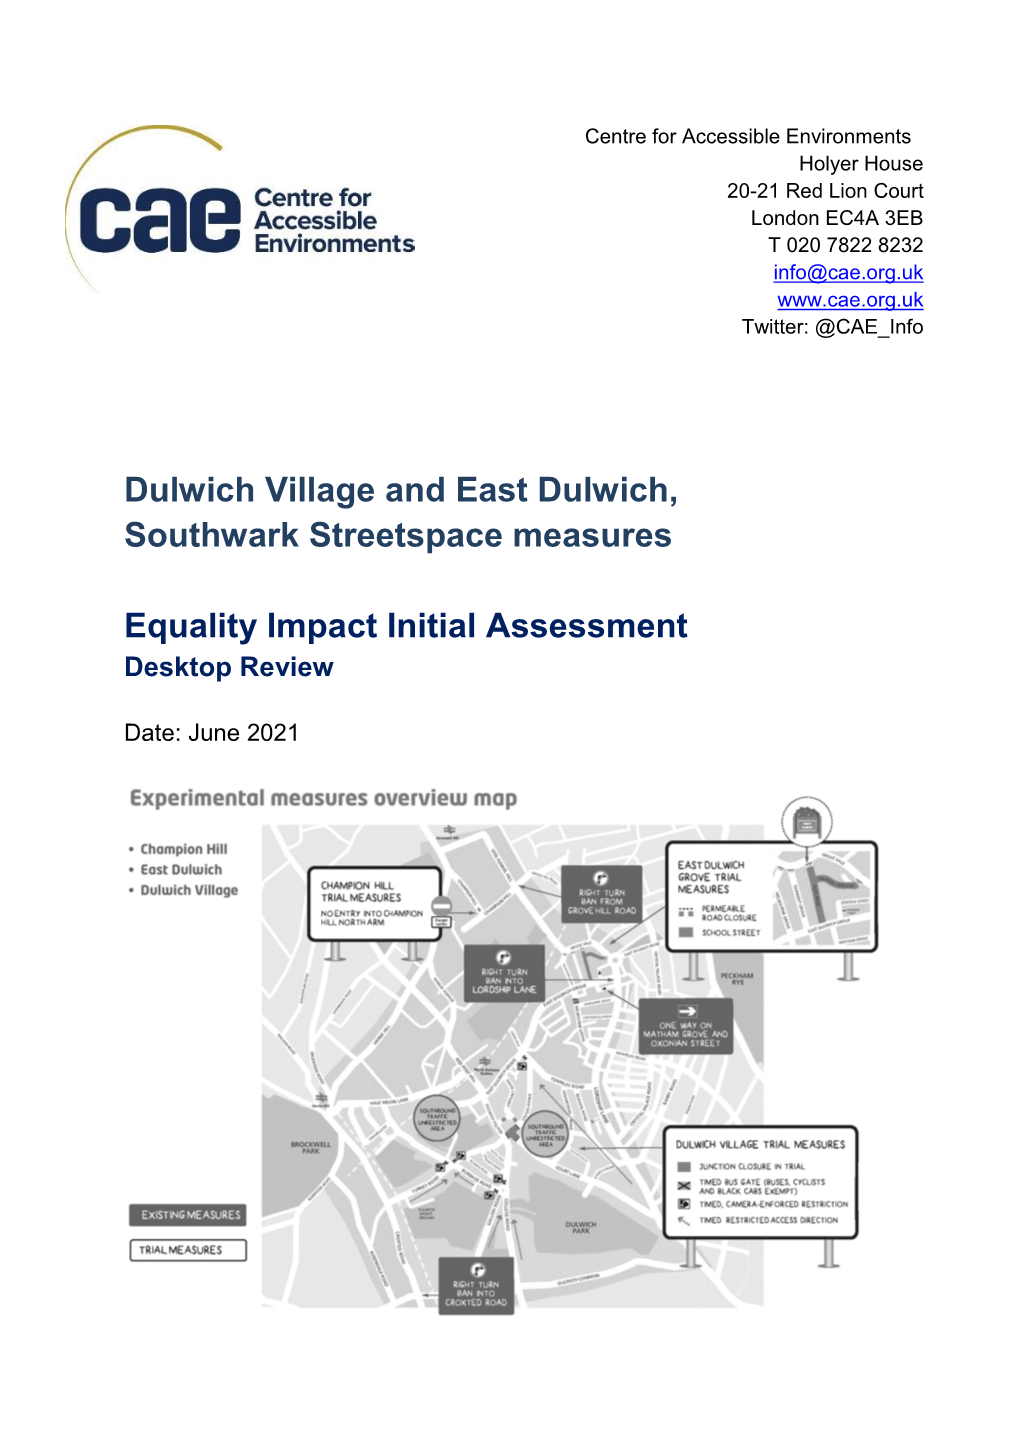 Dulwich Village and East Dulwich, Southwark Streetspace Measures Equality Impact Initial Assessment